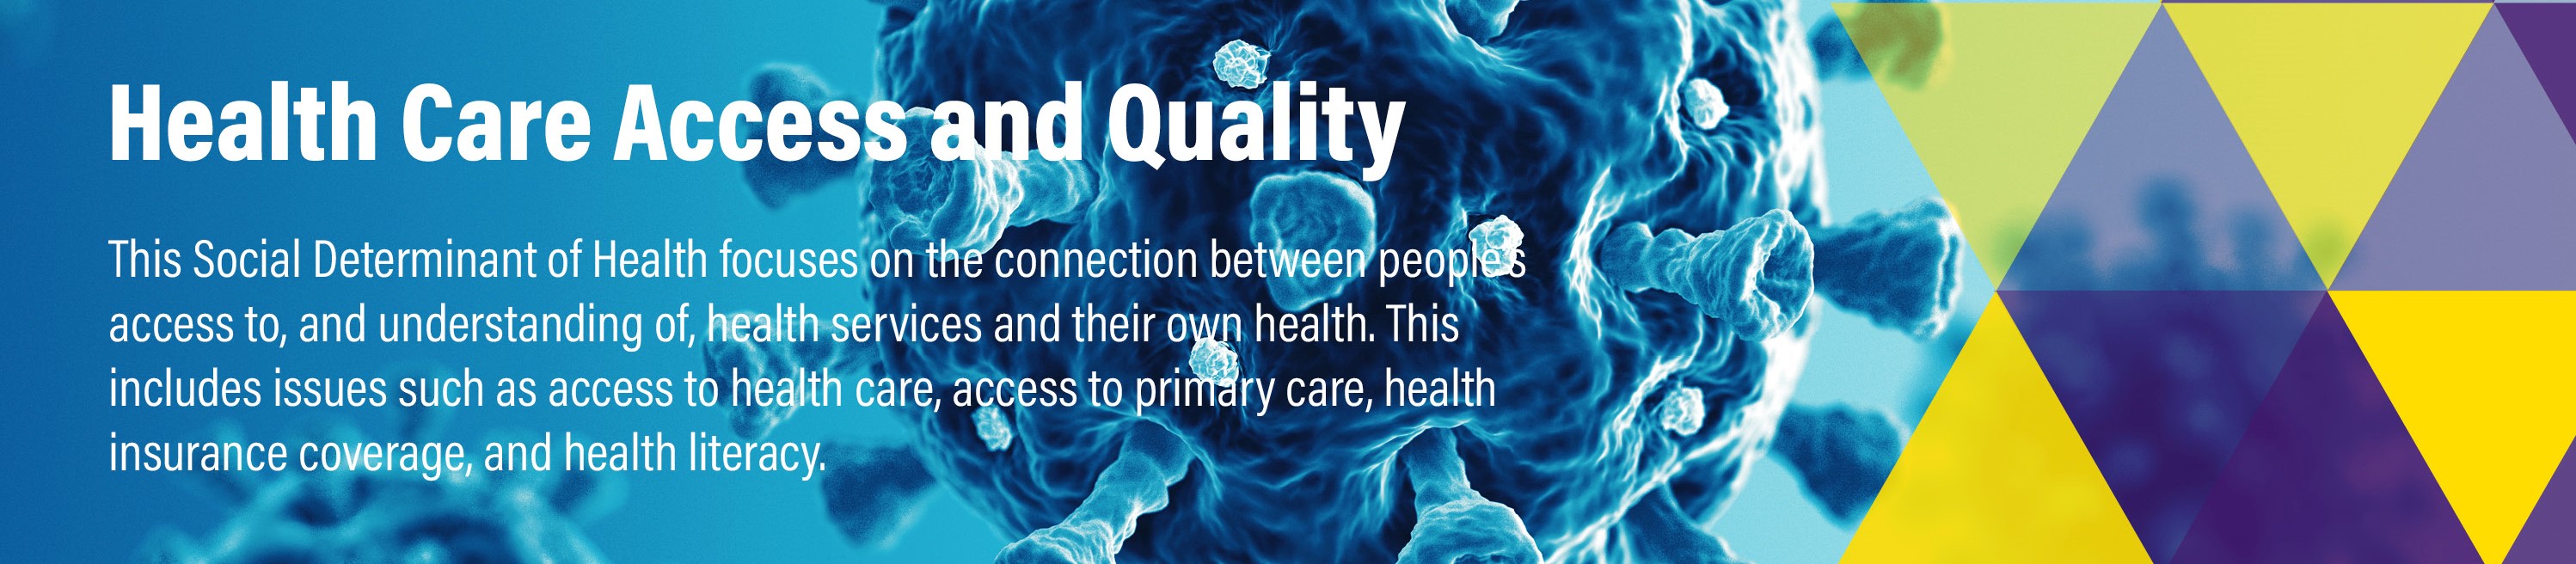 This Social Determinant of Health focuses on the connection between people’s access to, and understanding of, health services and their own health. This includes issues such as access to health care, access to primary care, health insurance coverage, and health literacy.